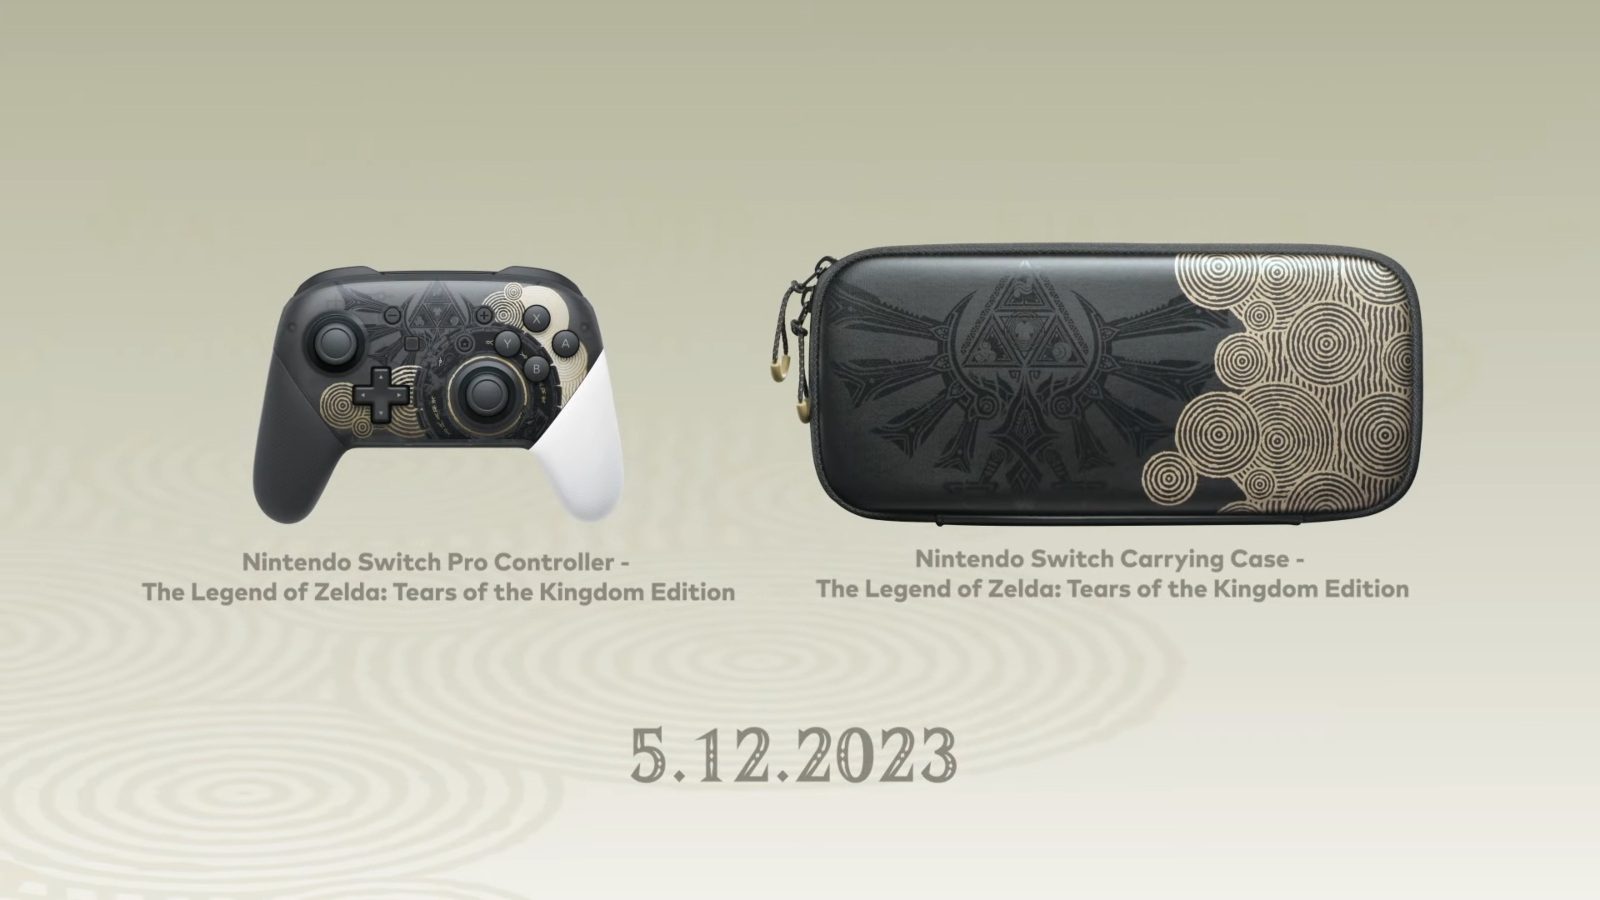 New Legend of Zelda-Themed Switch Controller is Now Available to